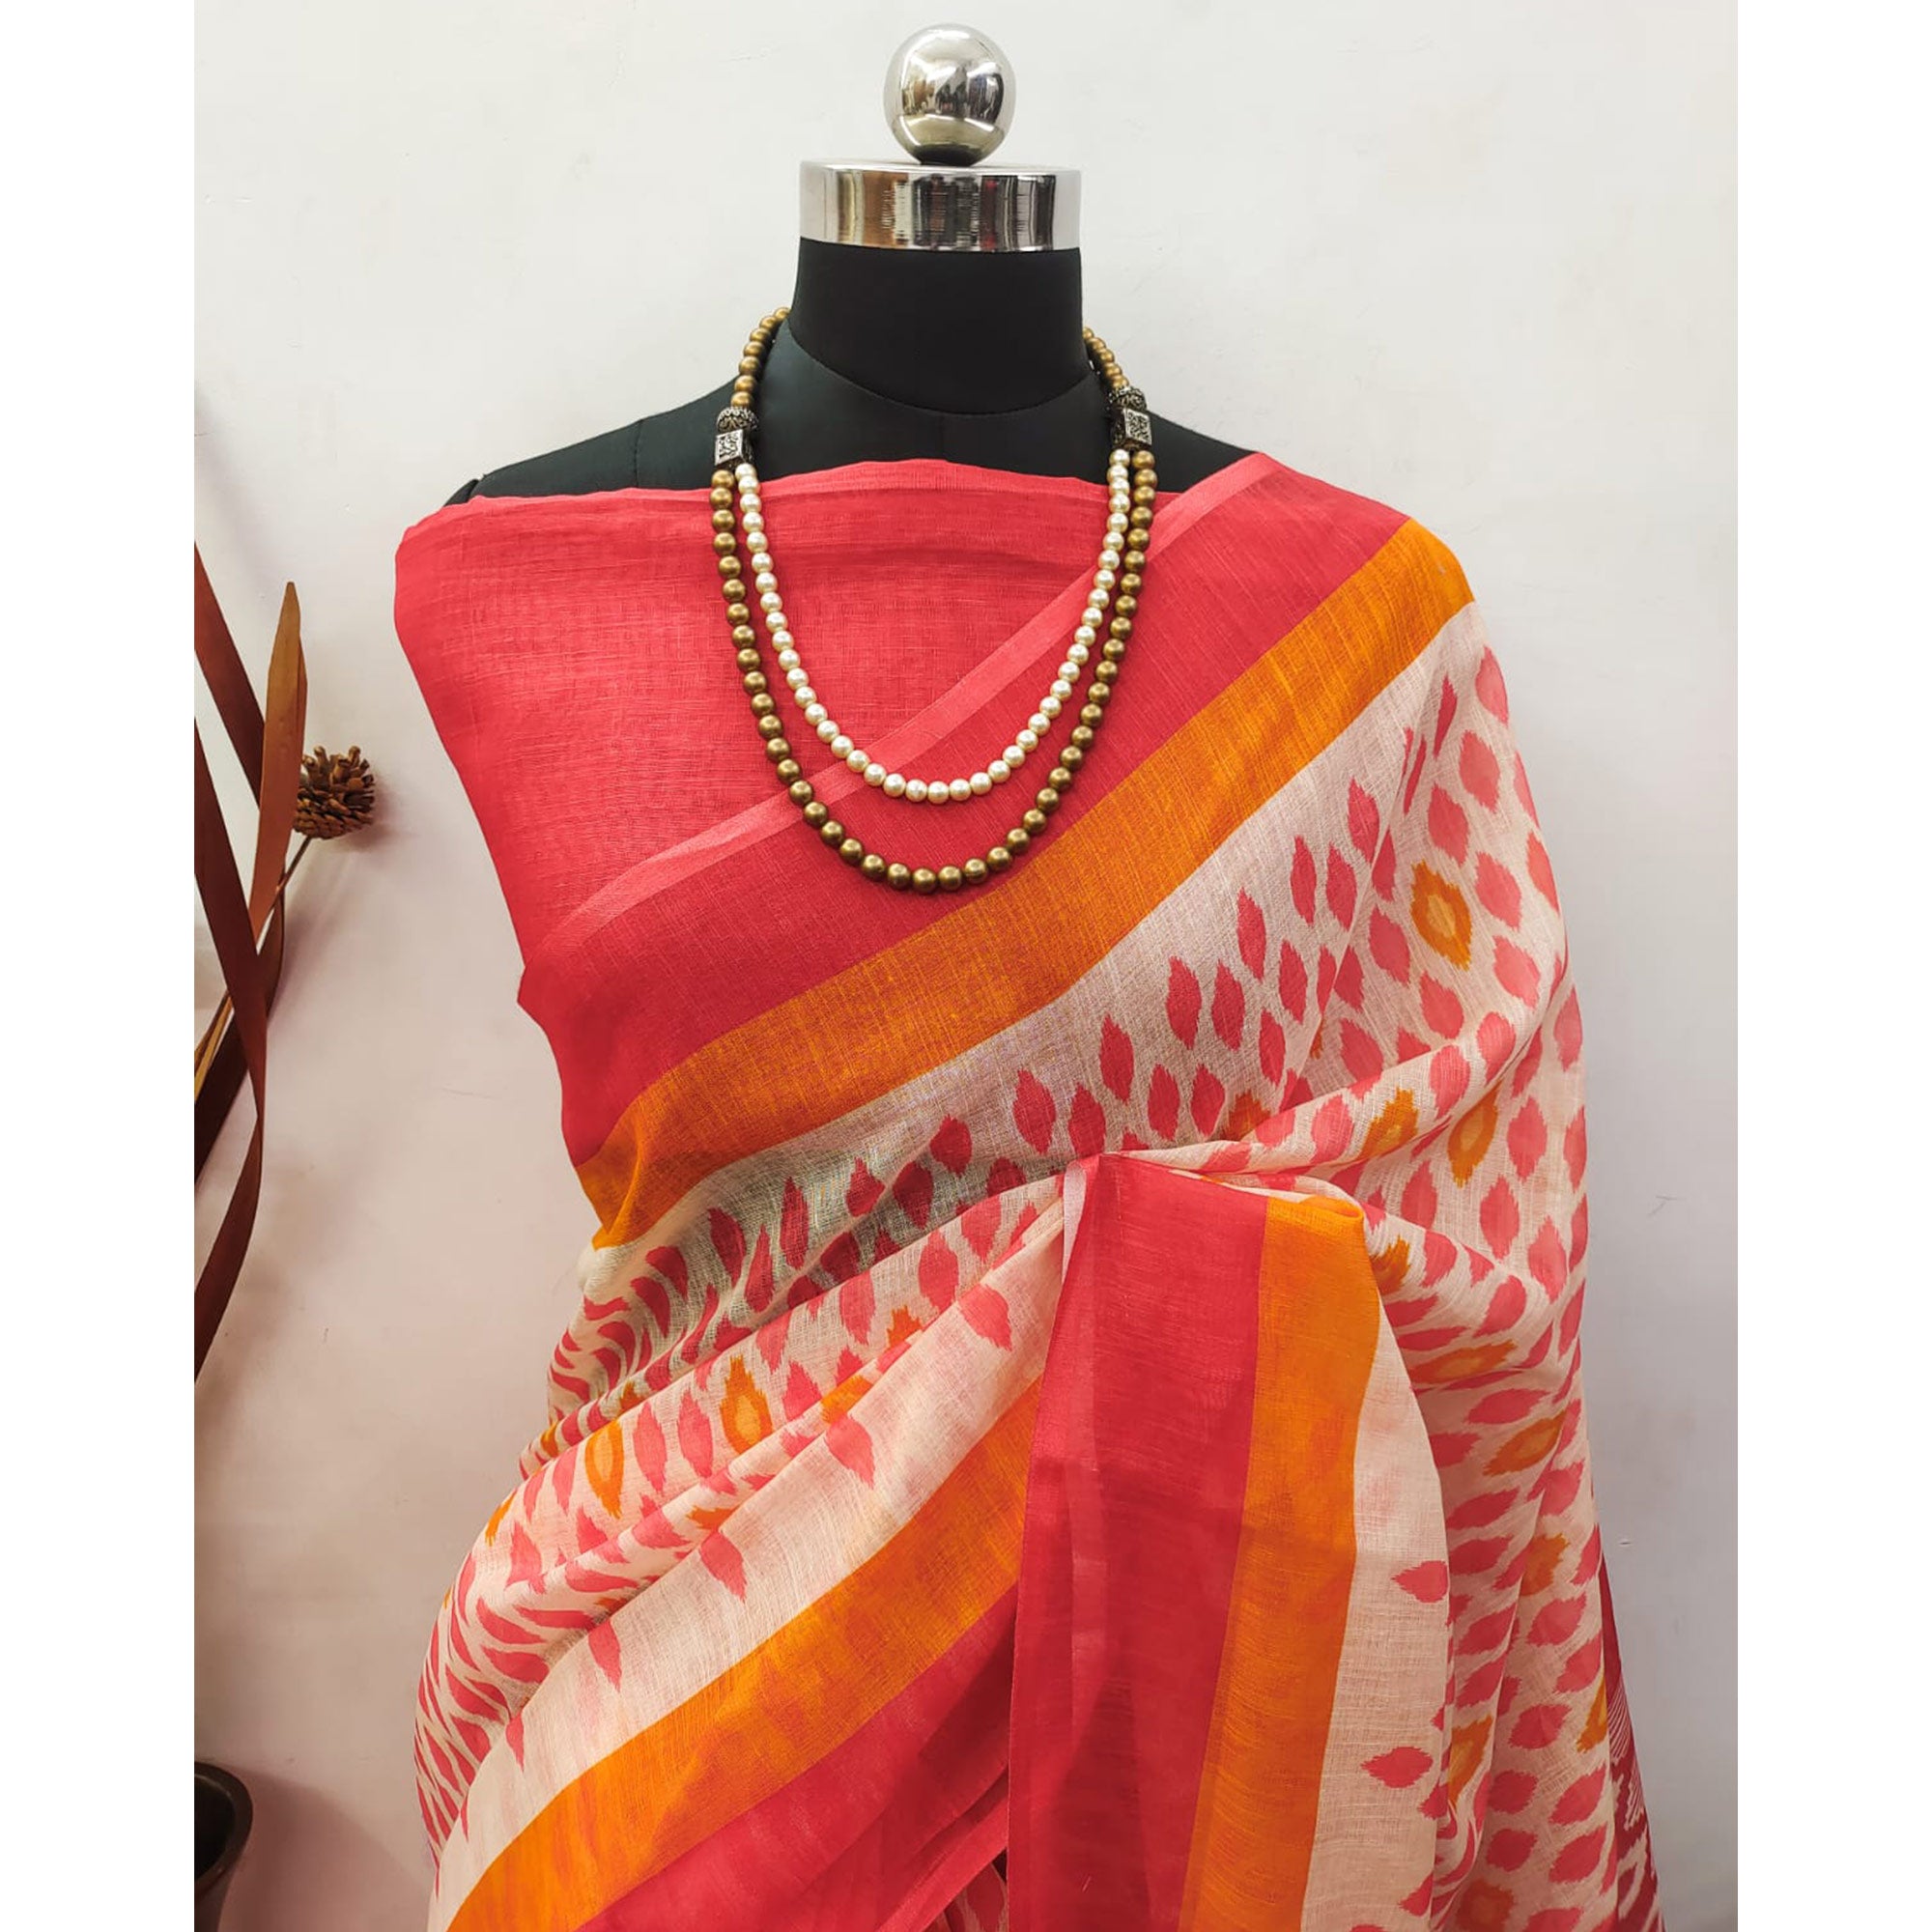 Off White & Red Digital Printed Linen Saree